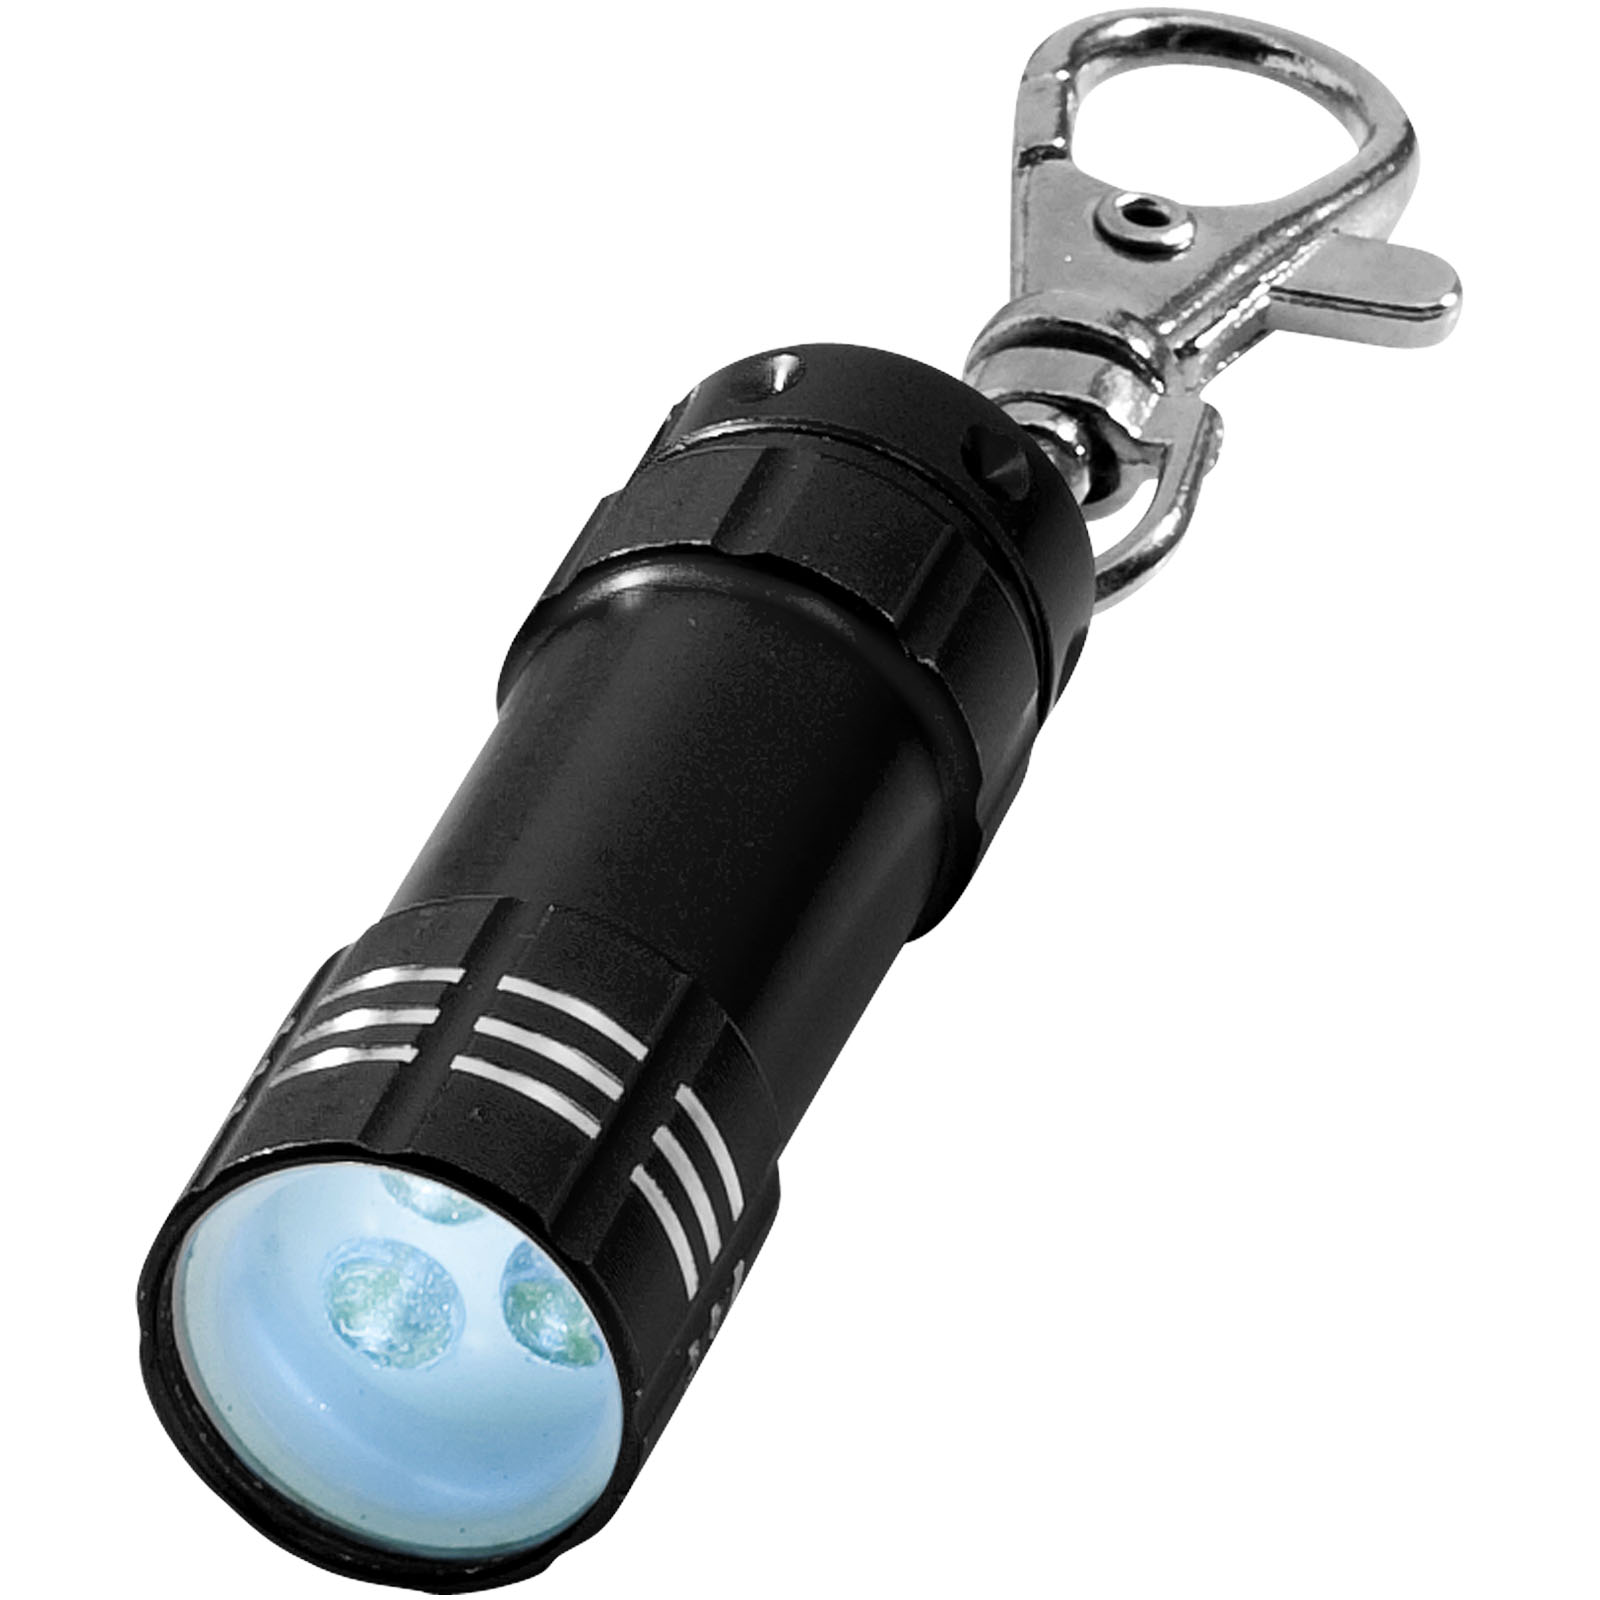 Advertising Lamps - Astro LED keychain light - 0